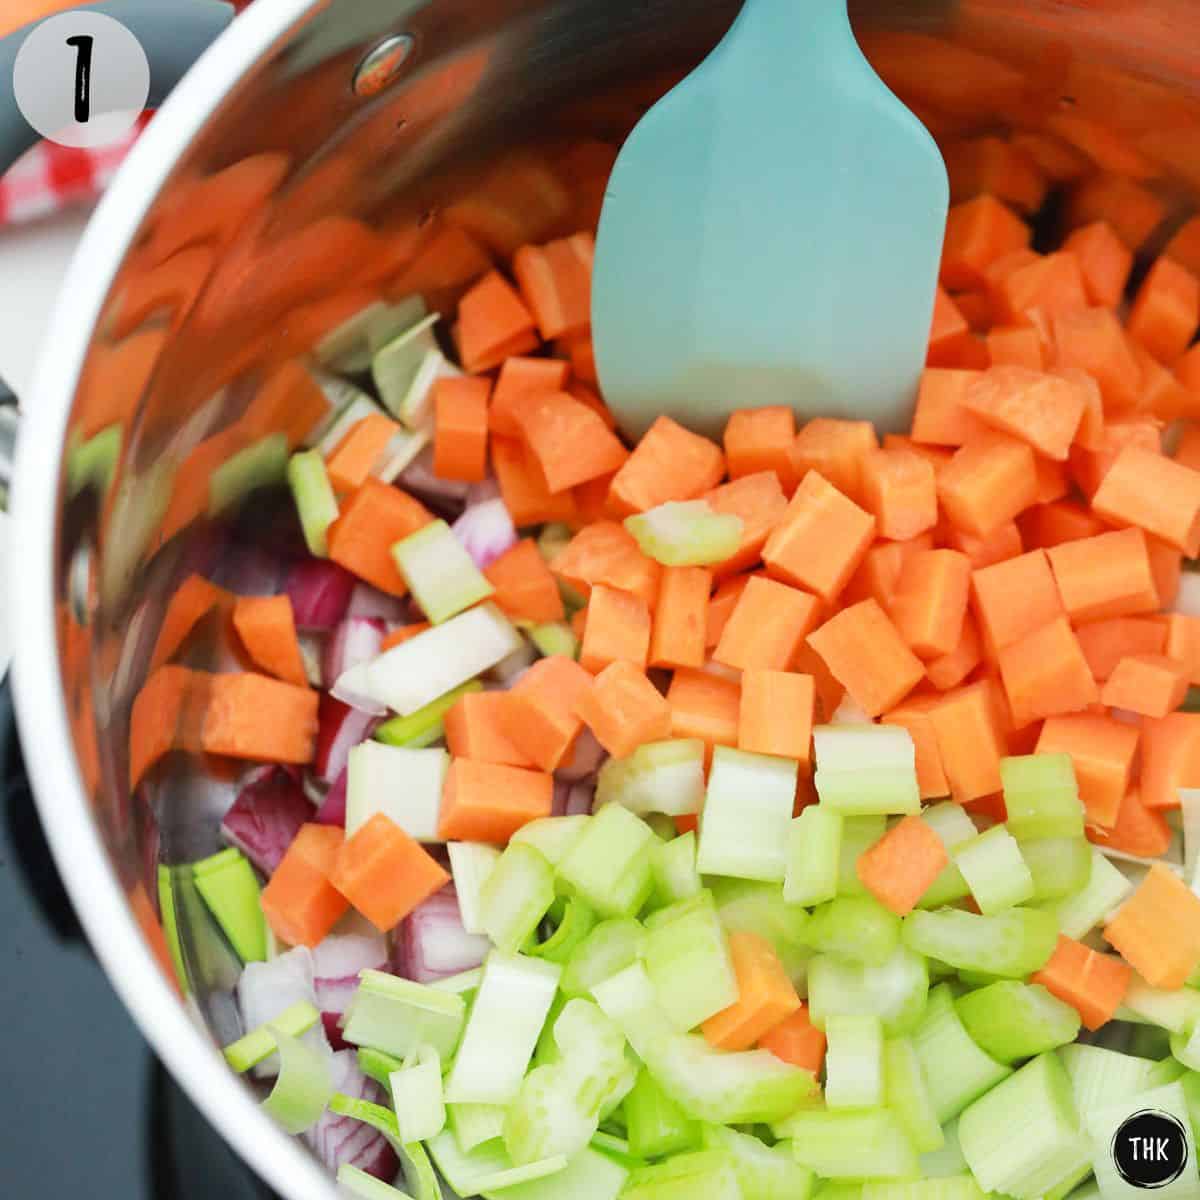 Diced onion, celery and carrots in large pot.